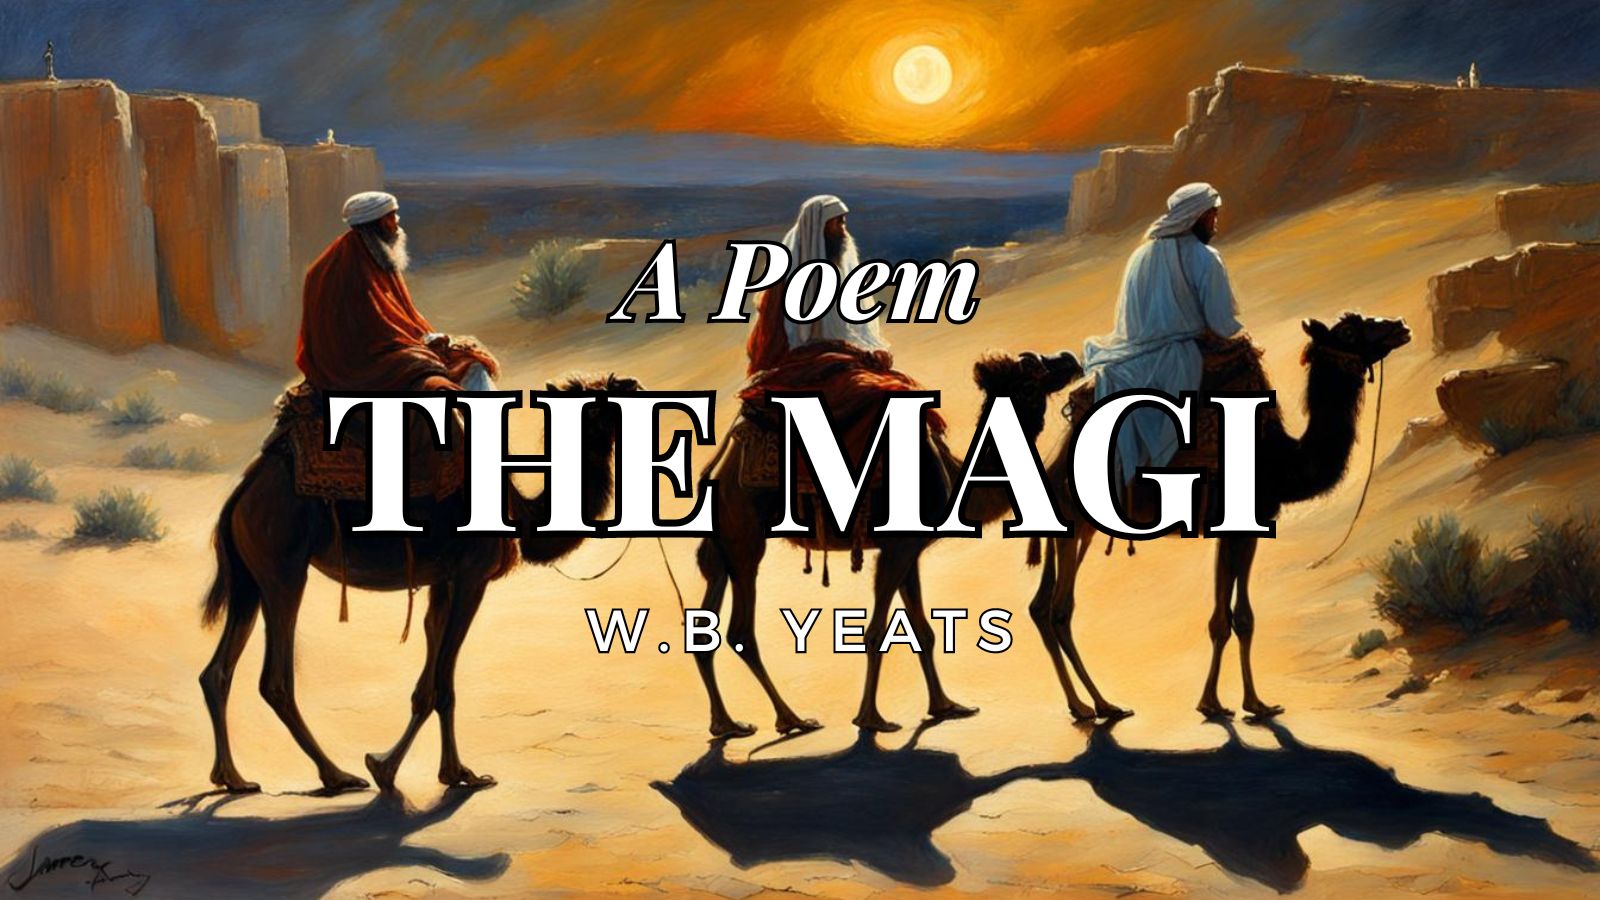 The Magi by William Butler Yeats